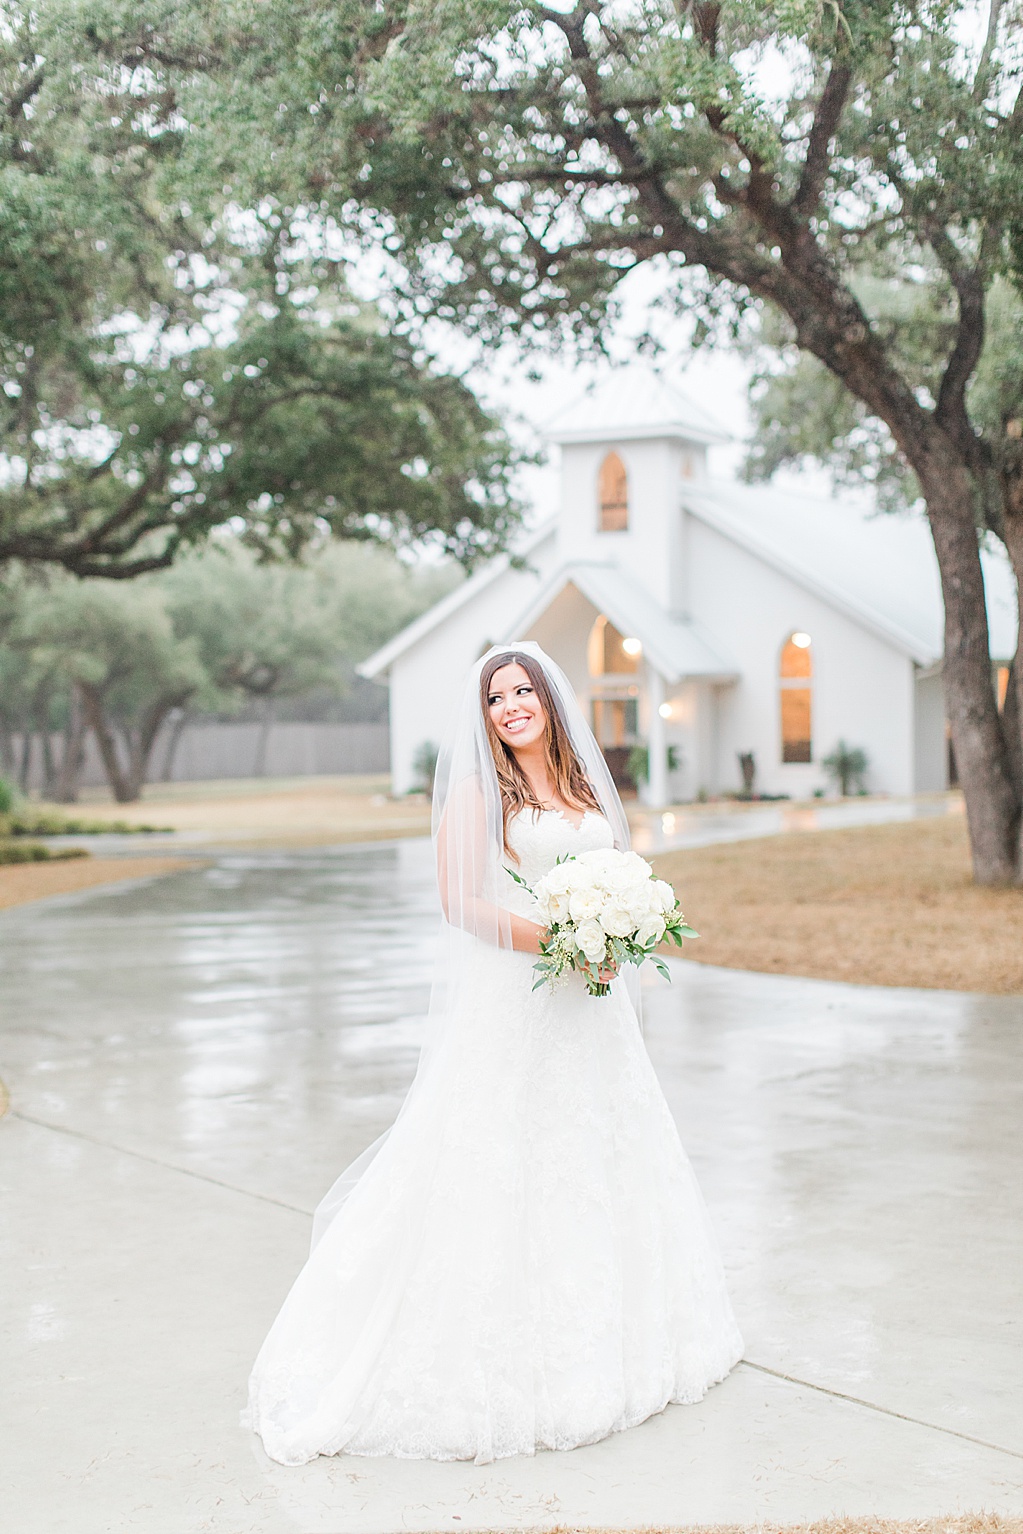 A Rainy Day Black and White Wedding at The Chandelier of Gruene 0065